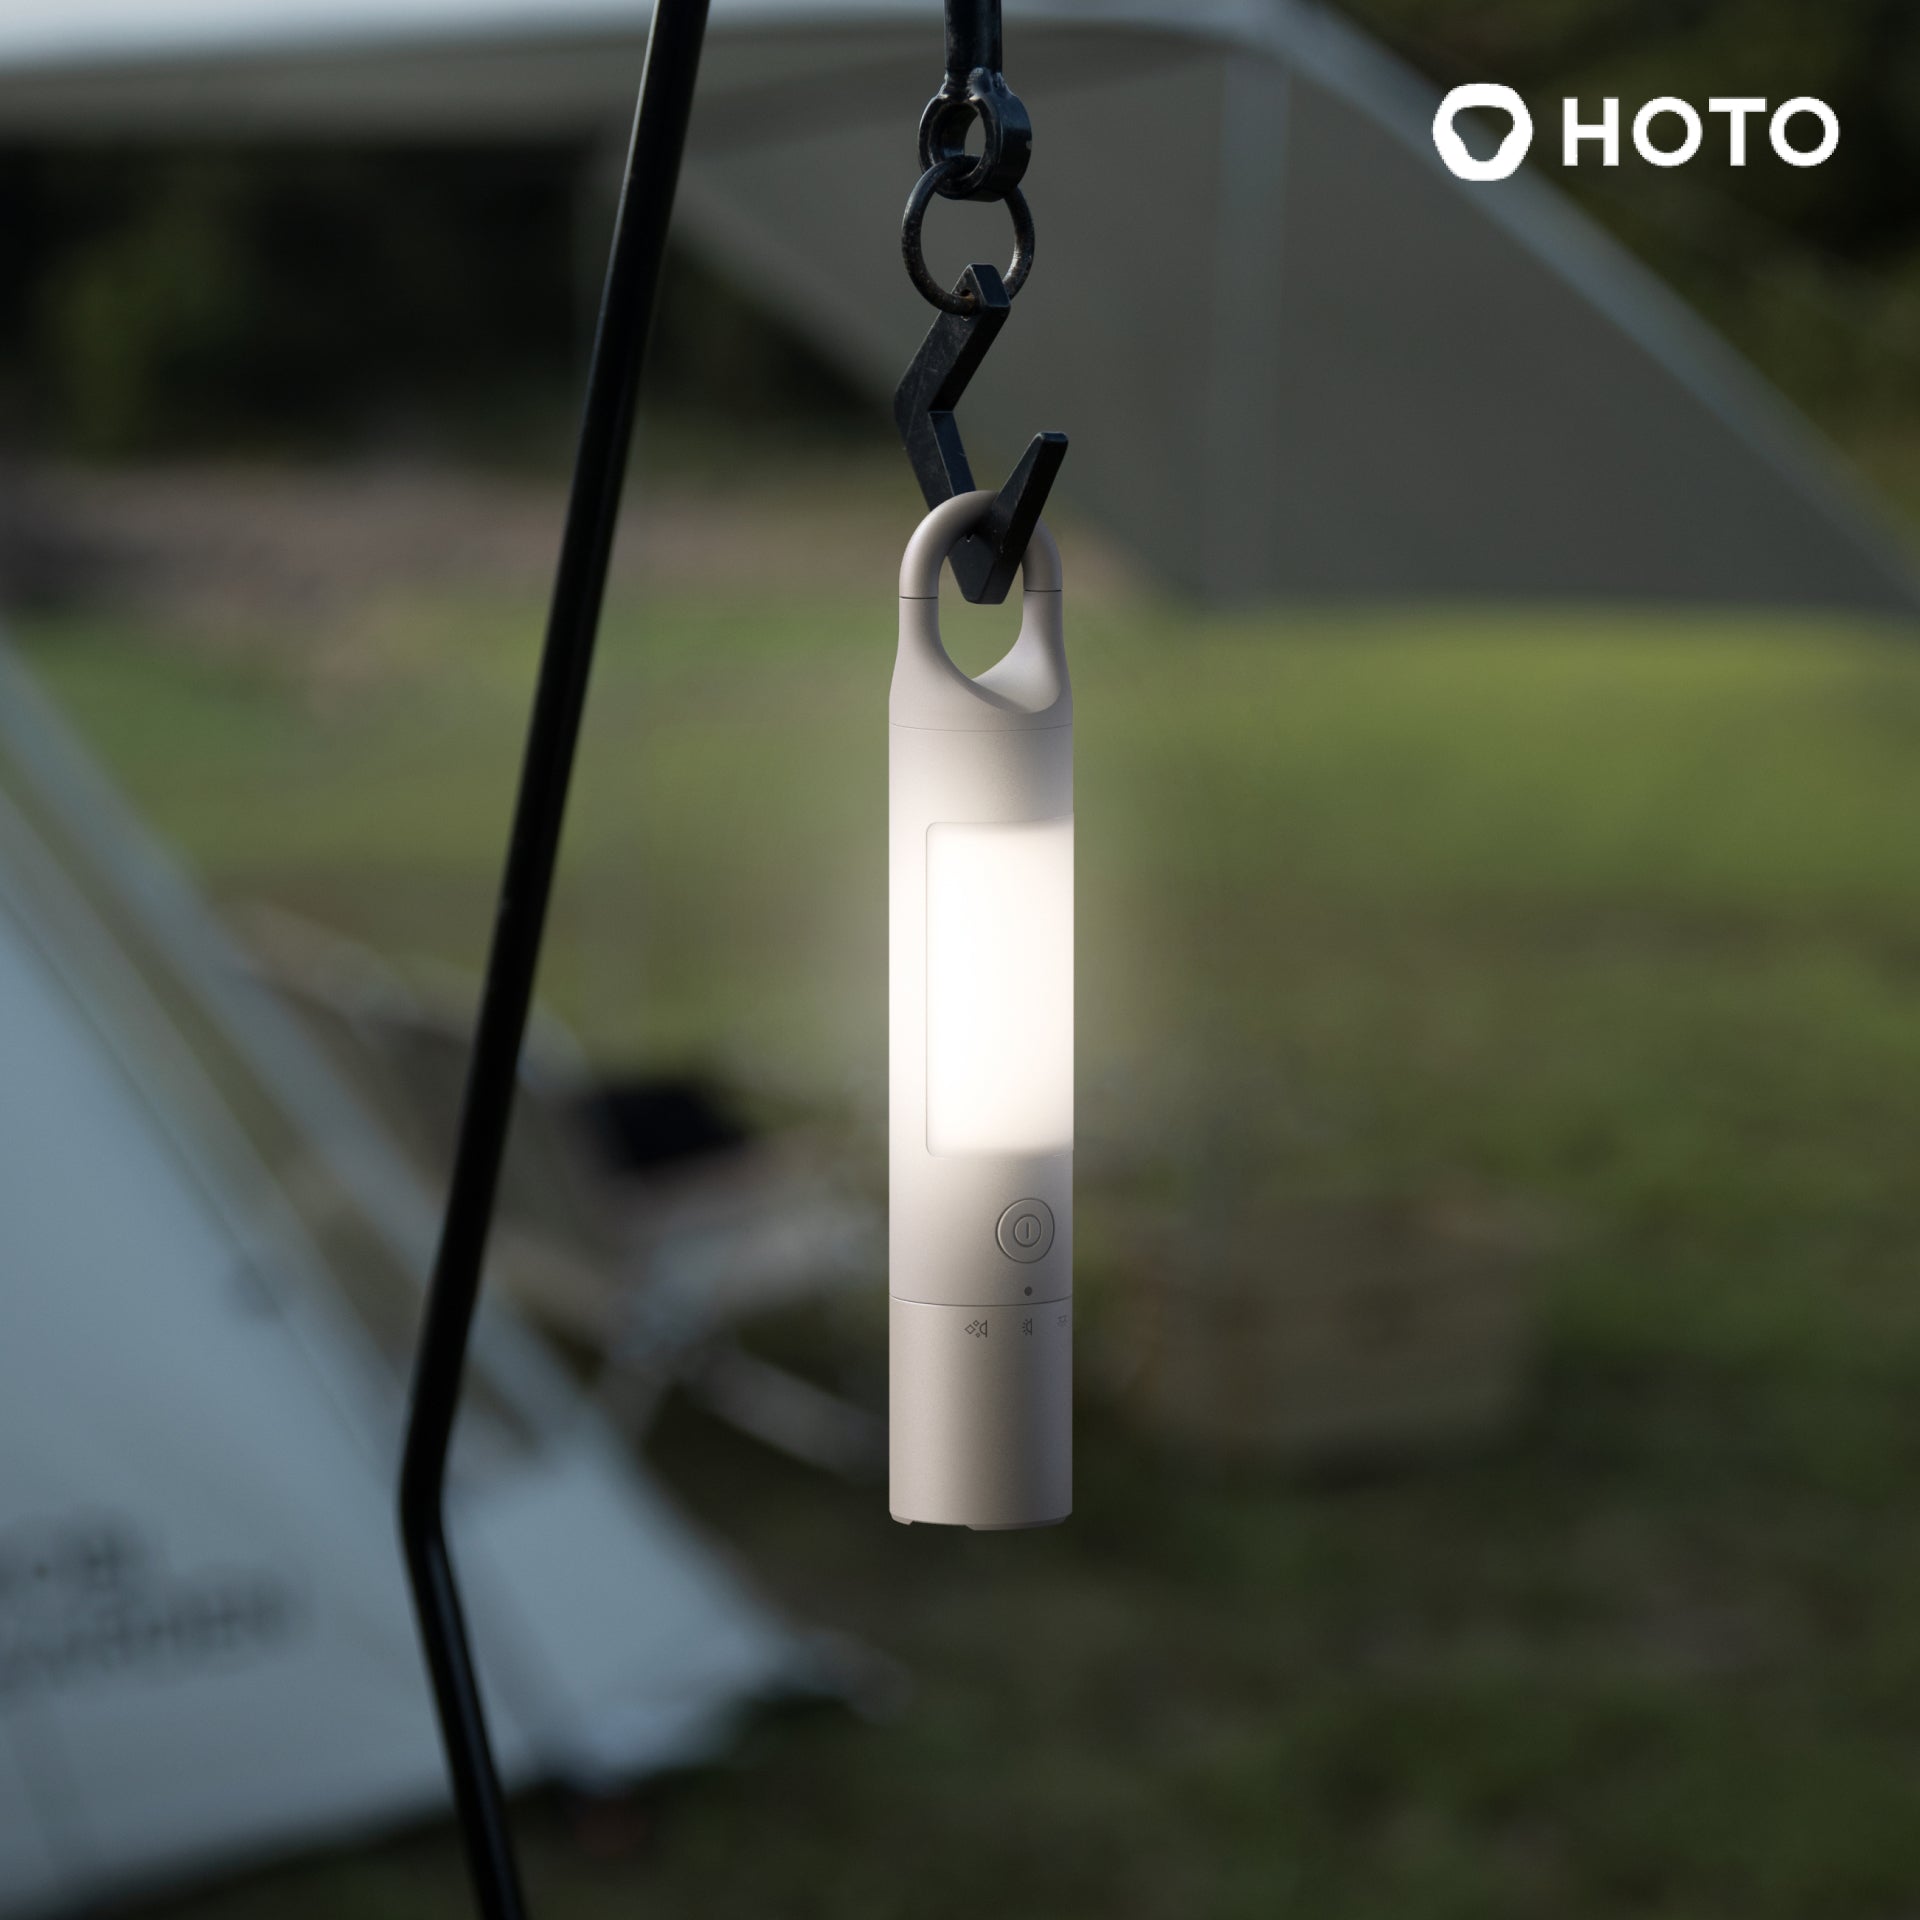 HOTO FLASHLIGHT DUO HOTO Flashlight Duo, USB-C Rechargeable, Colorful Ambient Light